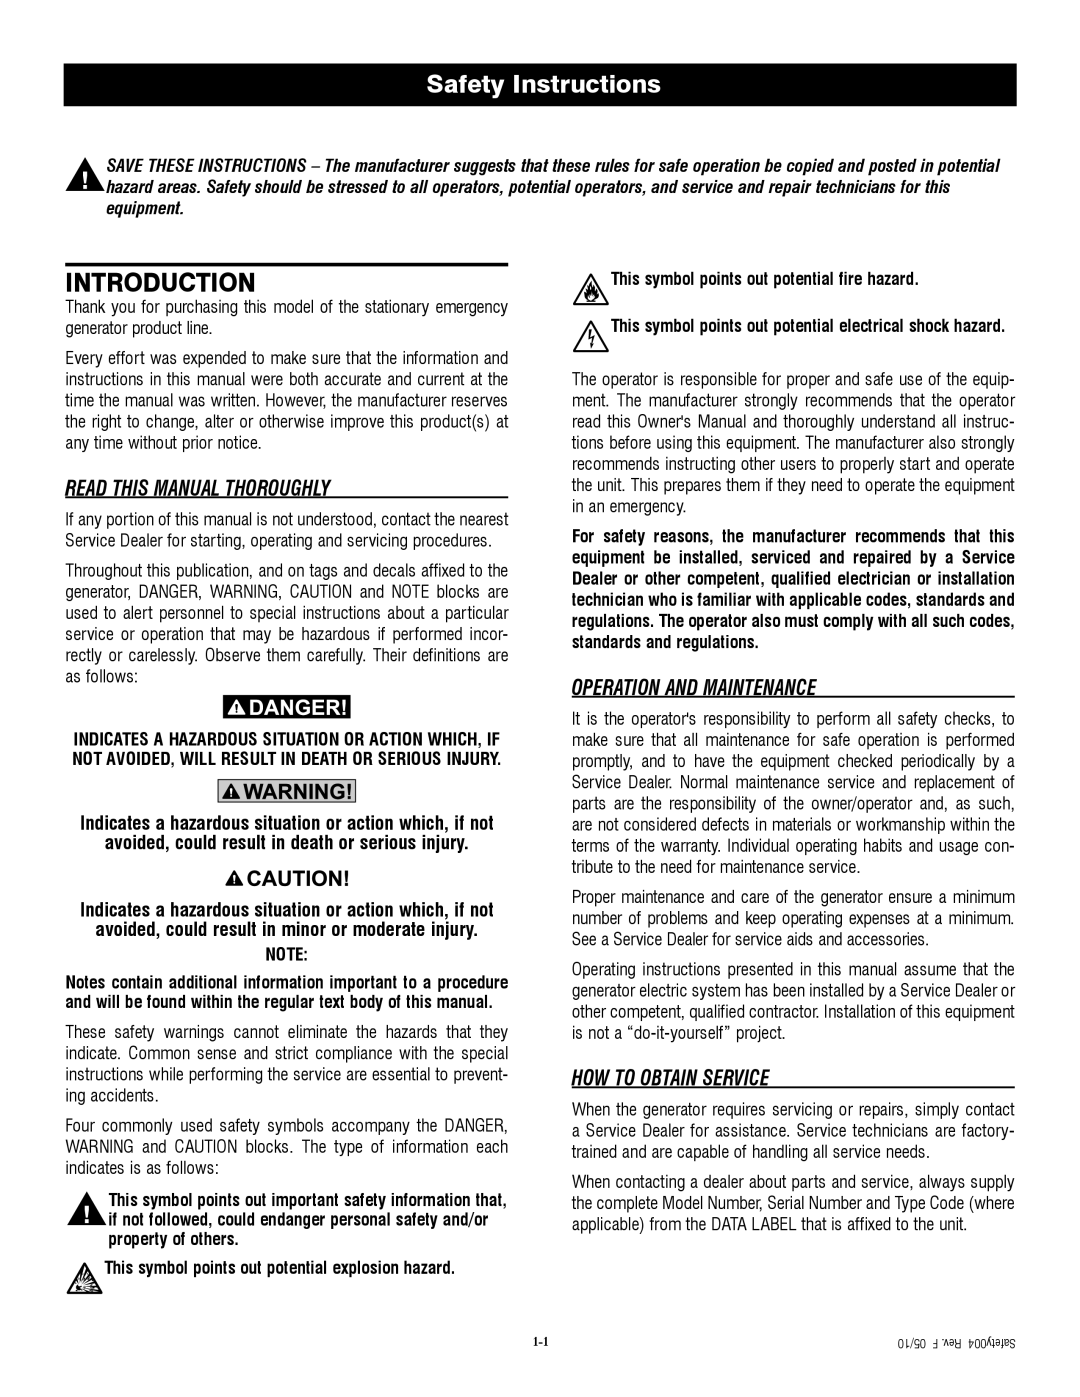 Generac QT04524ANSX owner manual Introduction, Safety Instructions, Read This Manual Thoroughly, Operation And Maintenance 